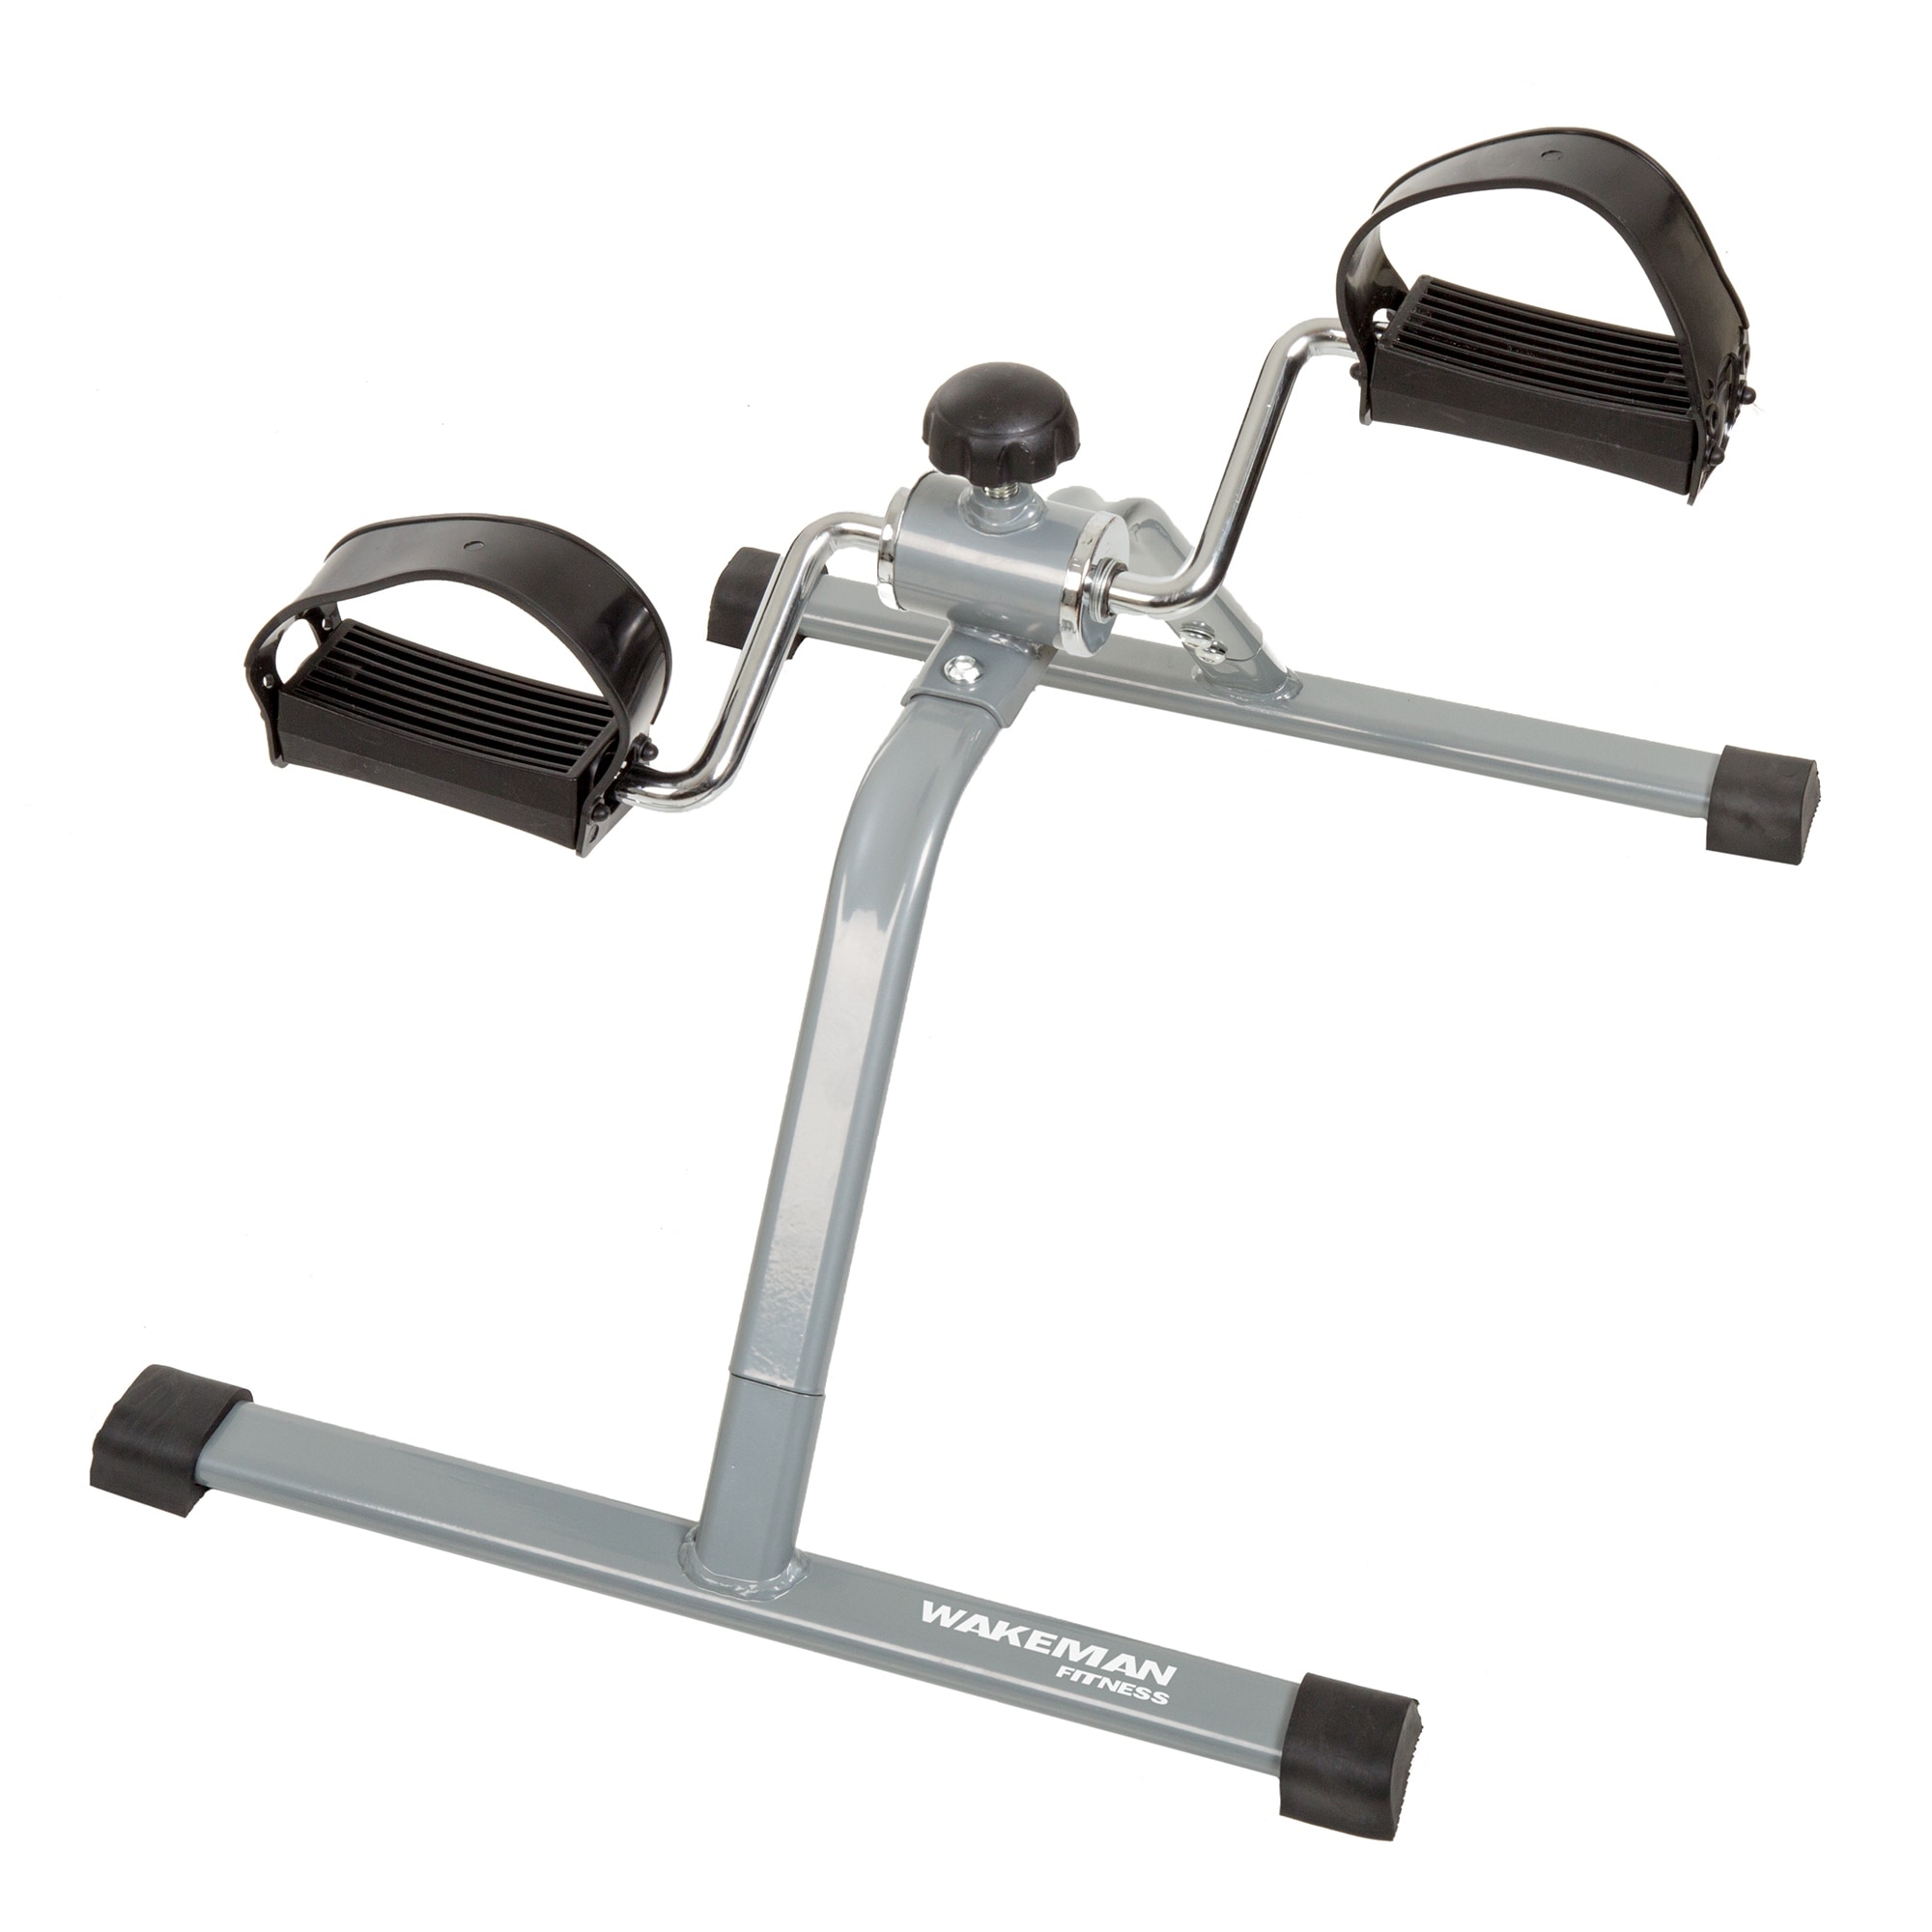 Under Desk Elliptical – Seated Exercise Equipment For A Low-impact